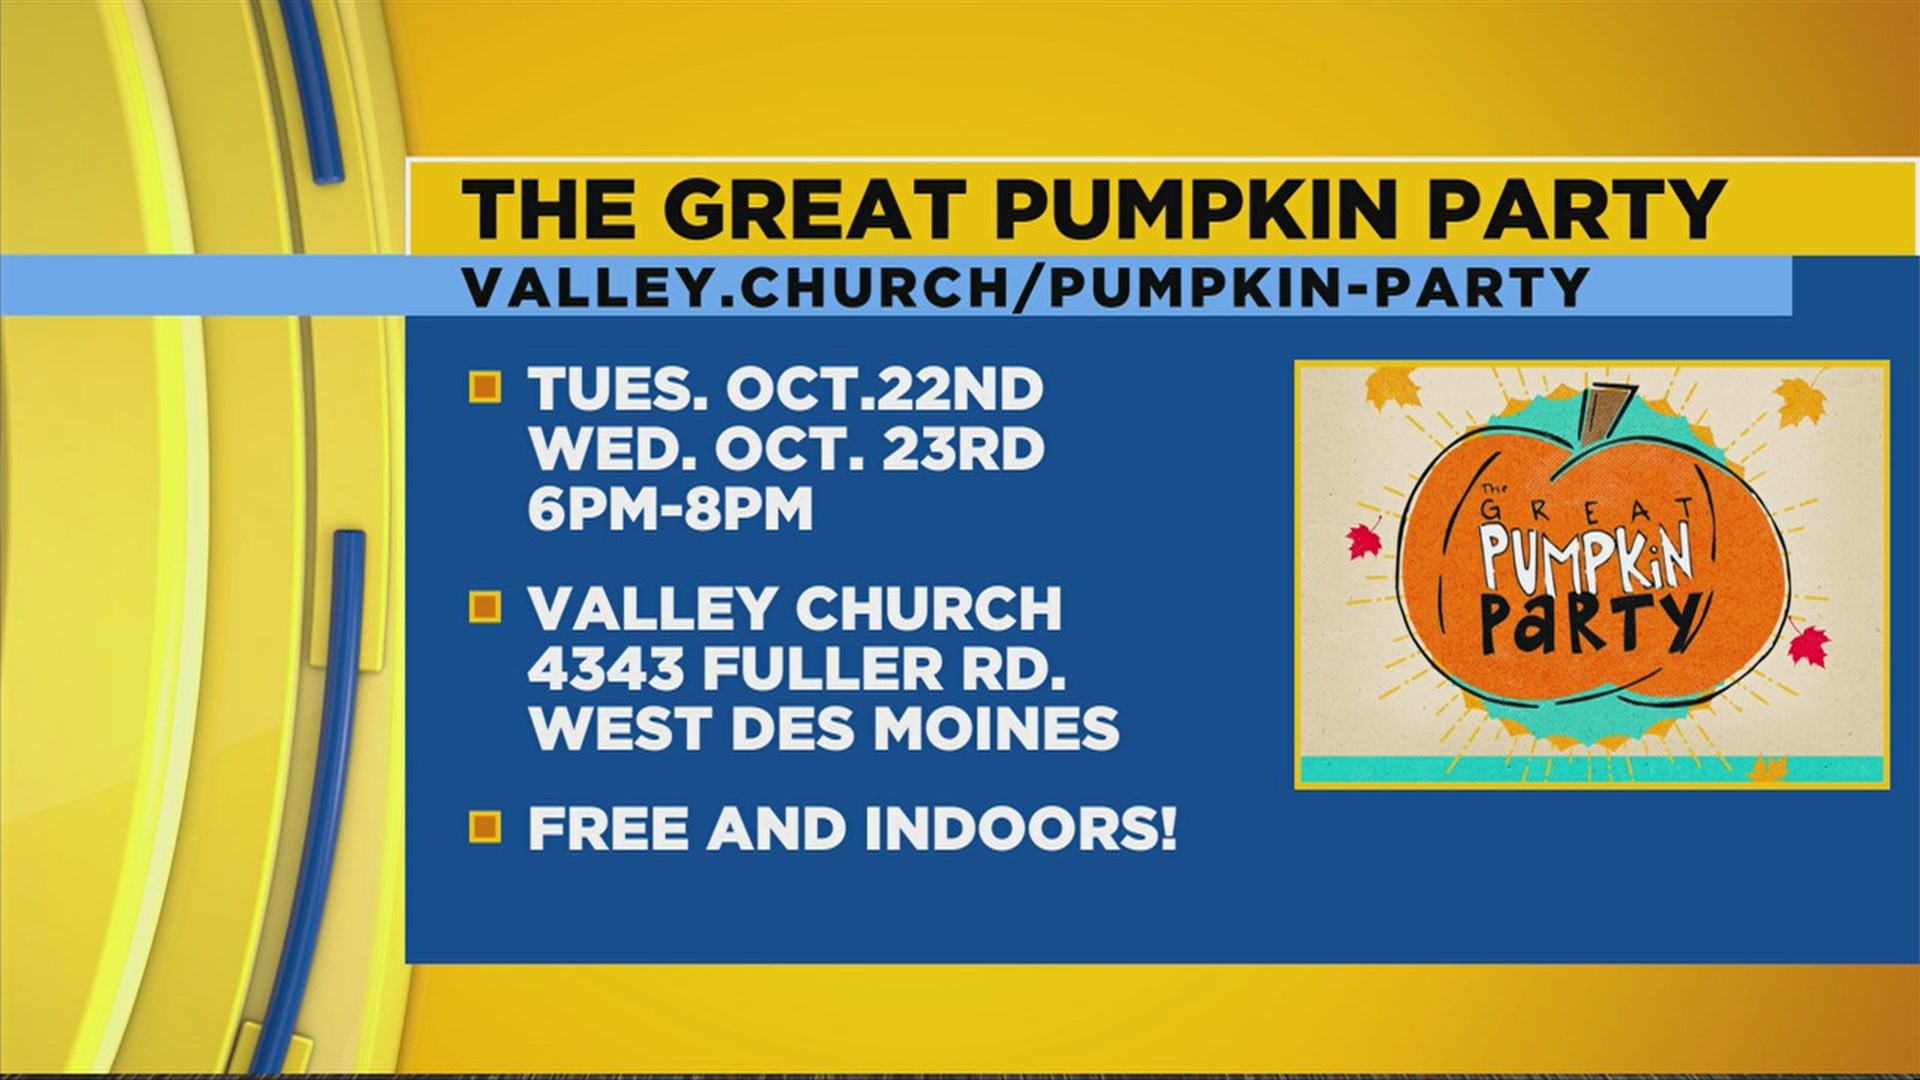 The Great Pumpkin Party at Valley Church